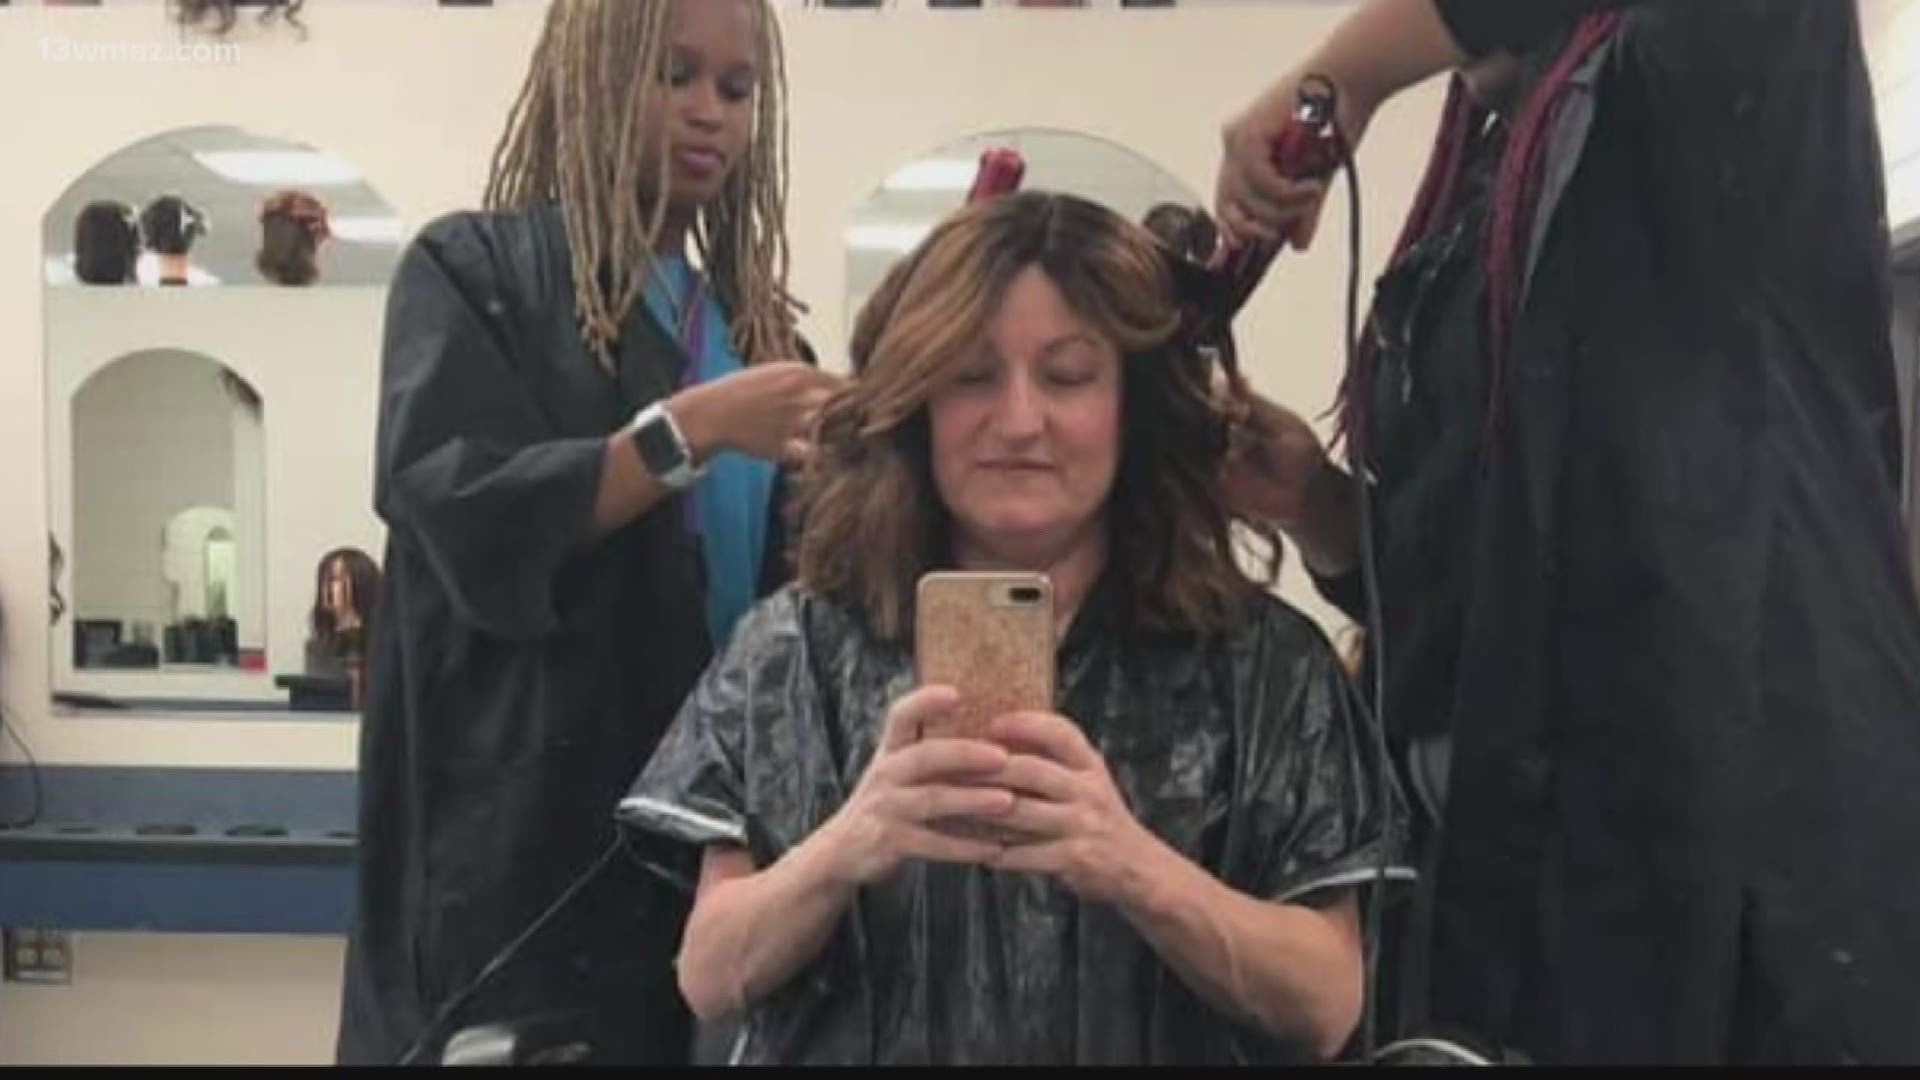 Doctors diagnosed Joanne Silvester with ovarian cancer in February, so students came together to make wigs for when her hair falls out during chemo.